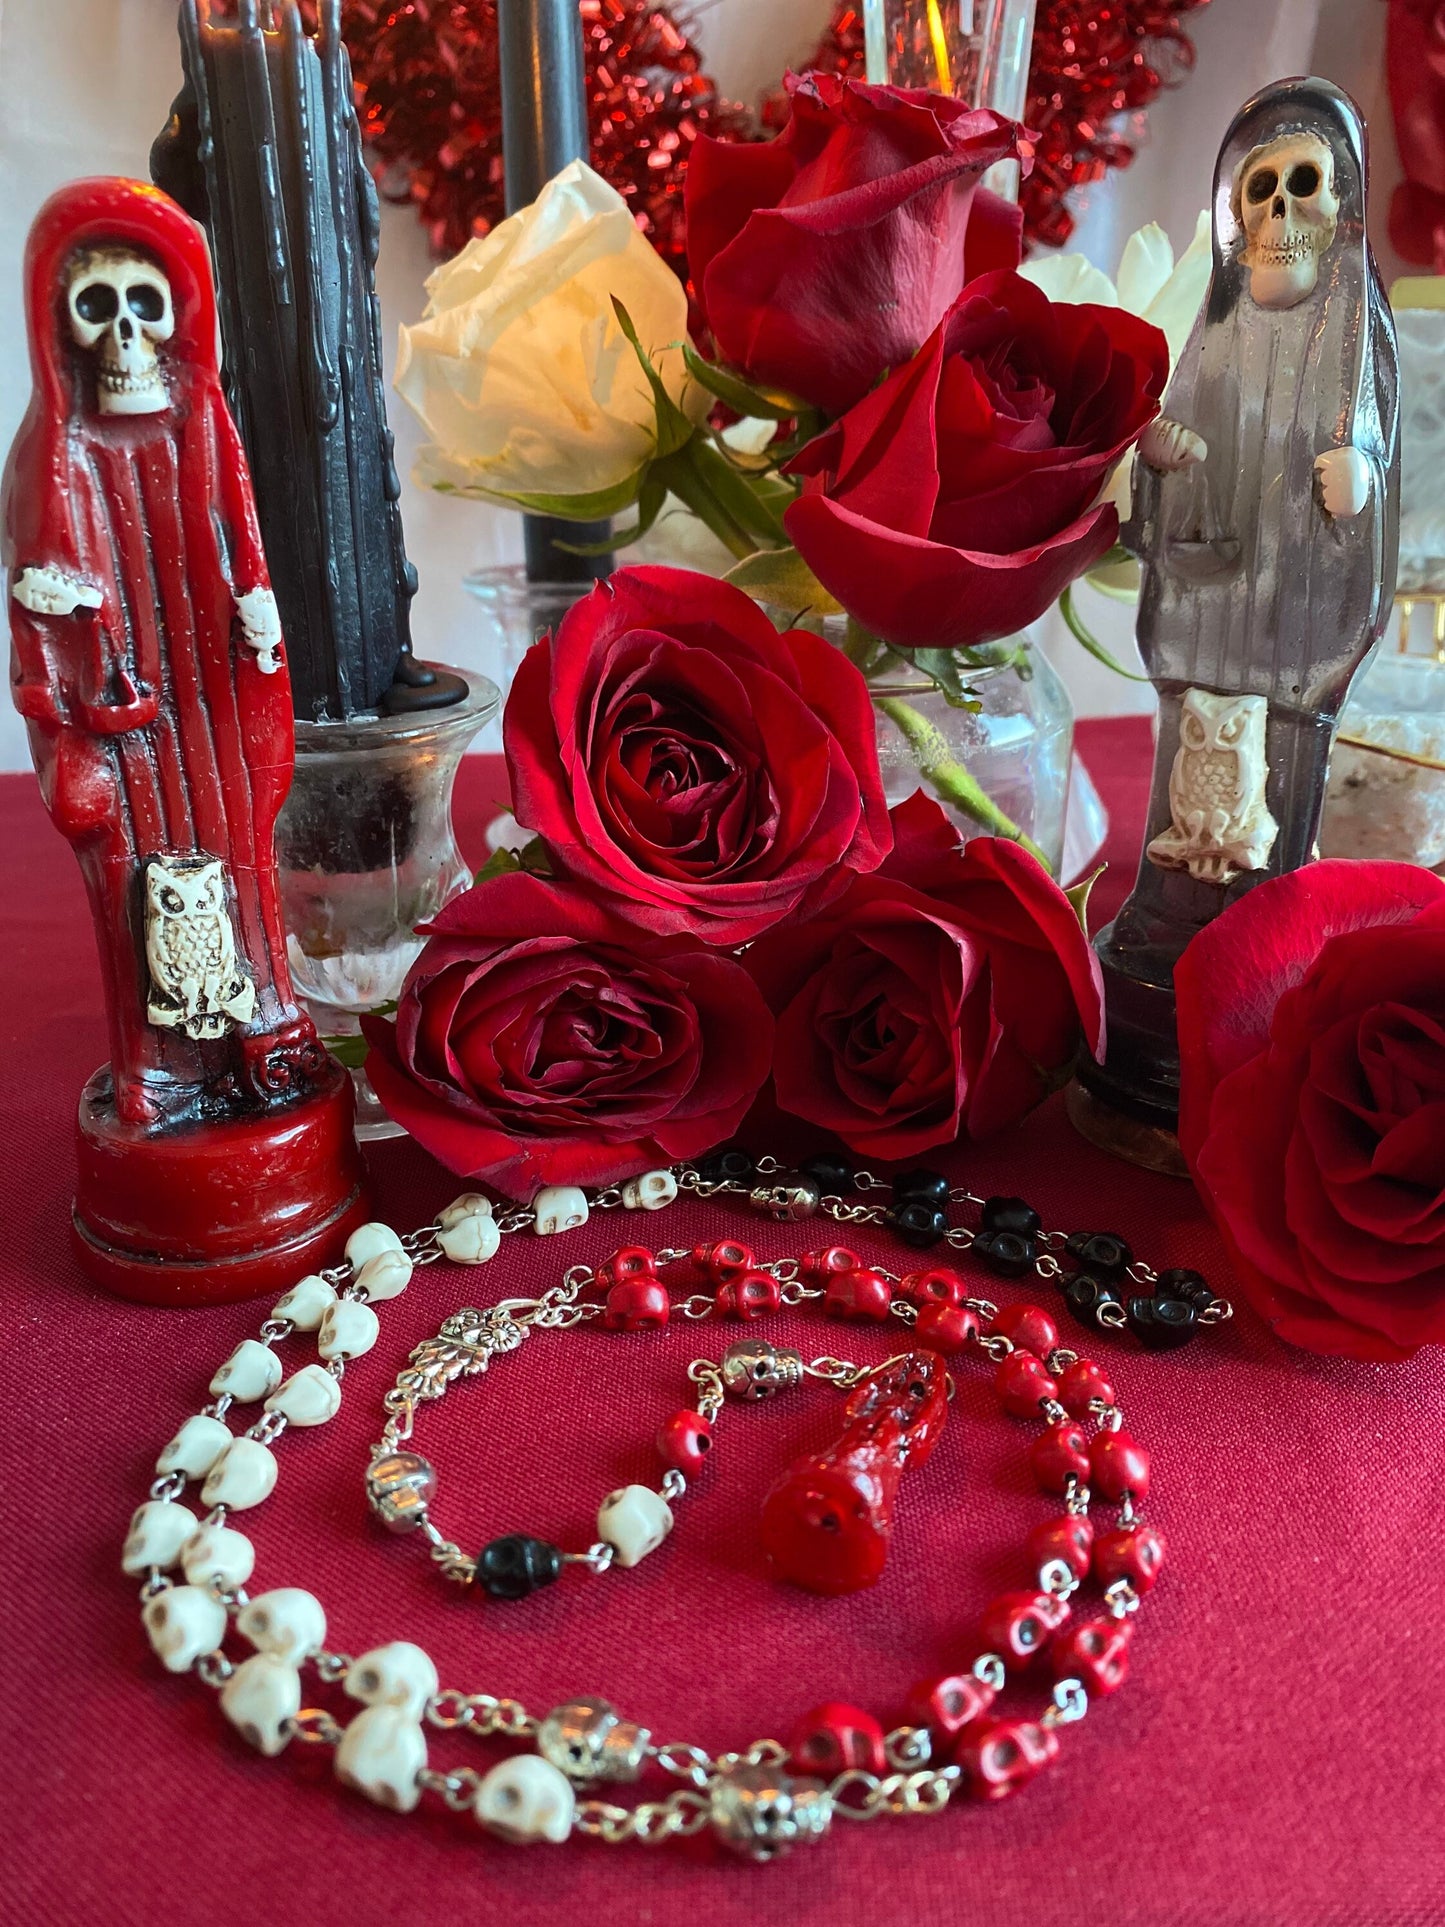 Santa Muerte Roja Rosary + Three Robes + Blessed + Sterling Silver Plated Chain + Handcrafted + Rosario